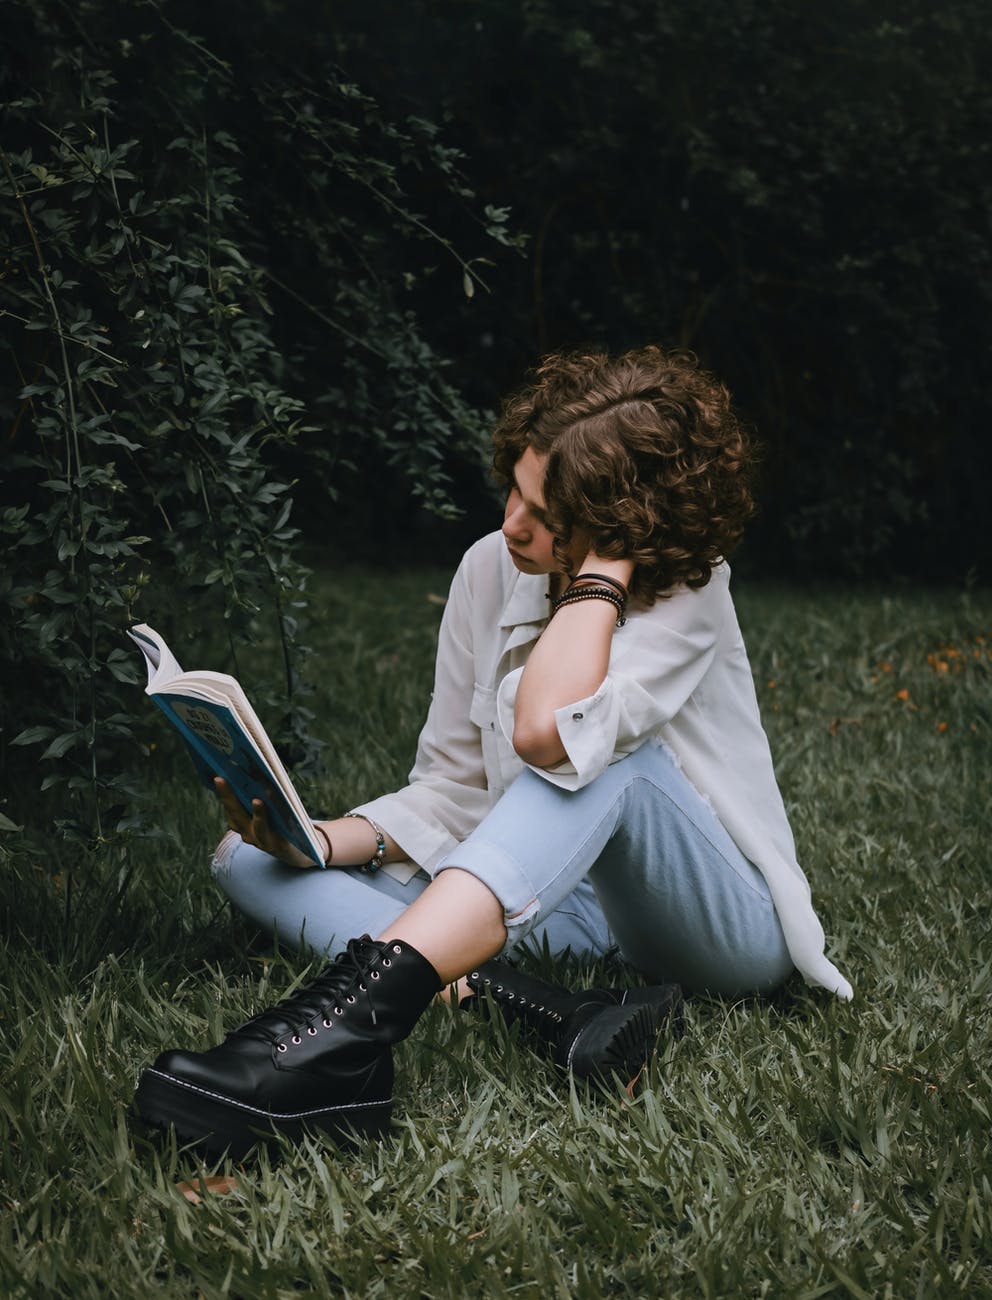 lady reading book while sitting on grassy lawn near plants